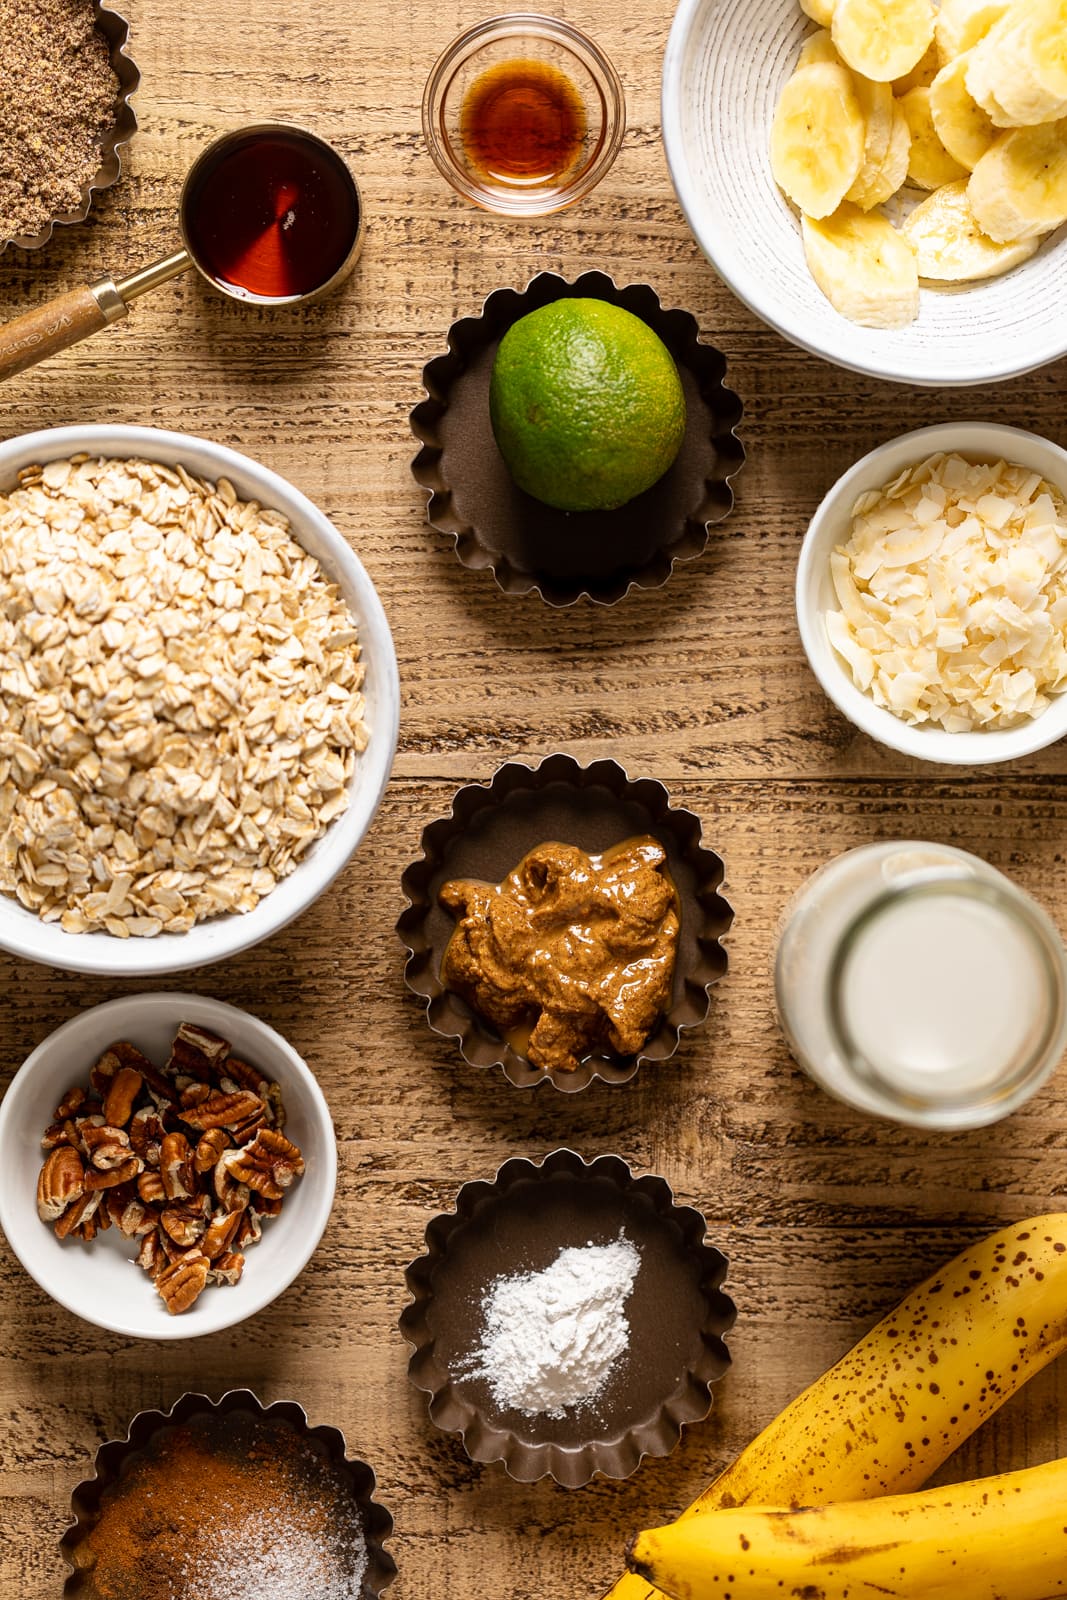 Ingredients for Jamaican-inspired Banana Bread Baked Oatmeal including lime, banana, and coconut flakes